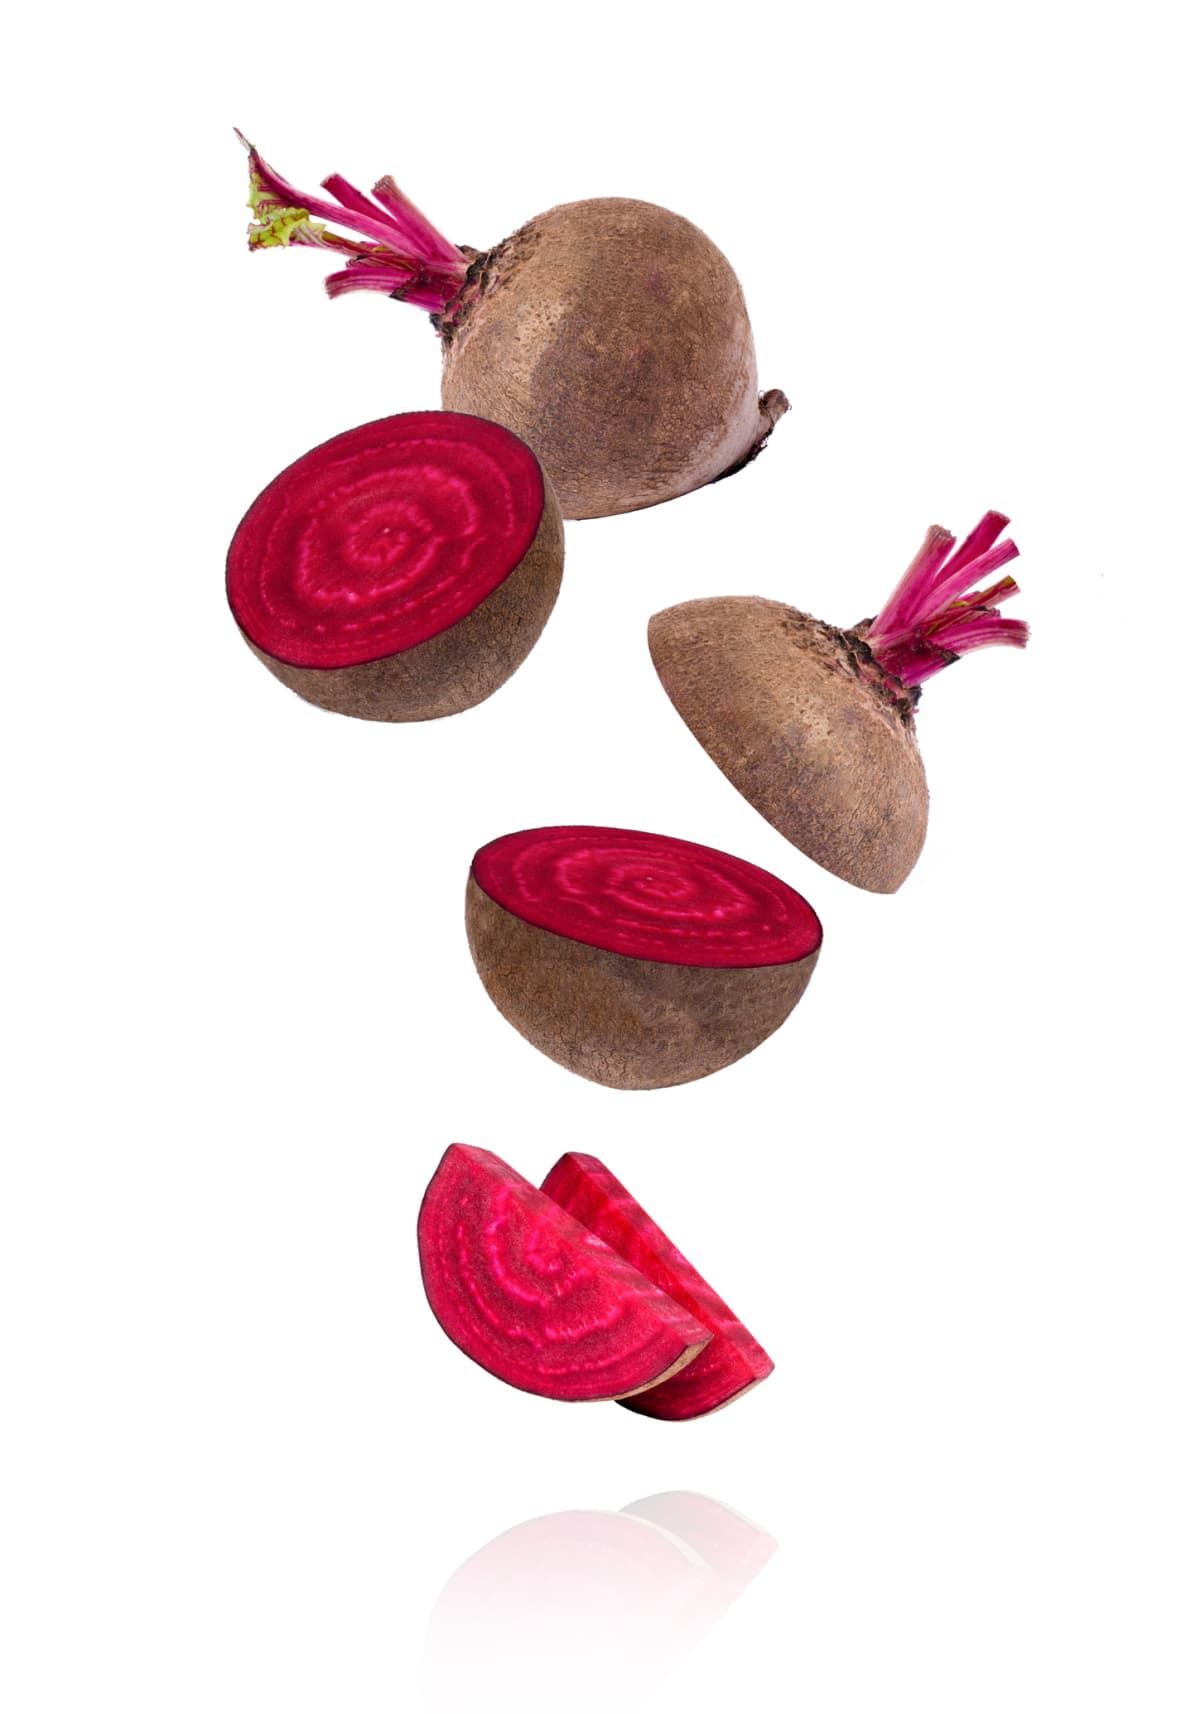 Beetroot and half sliced flying in the air isolated on white background